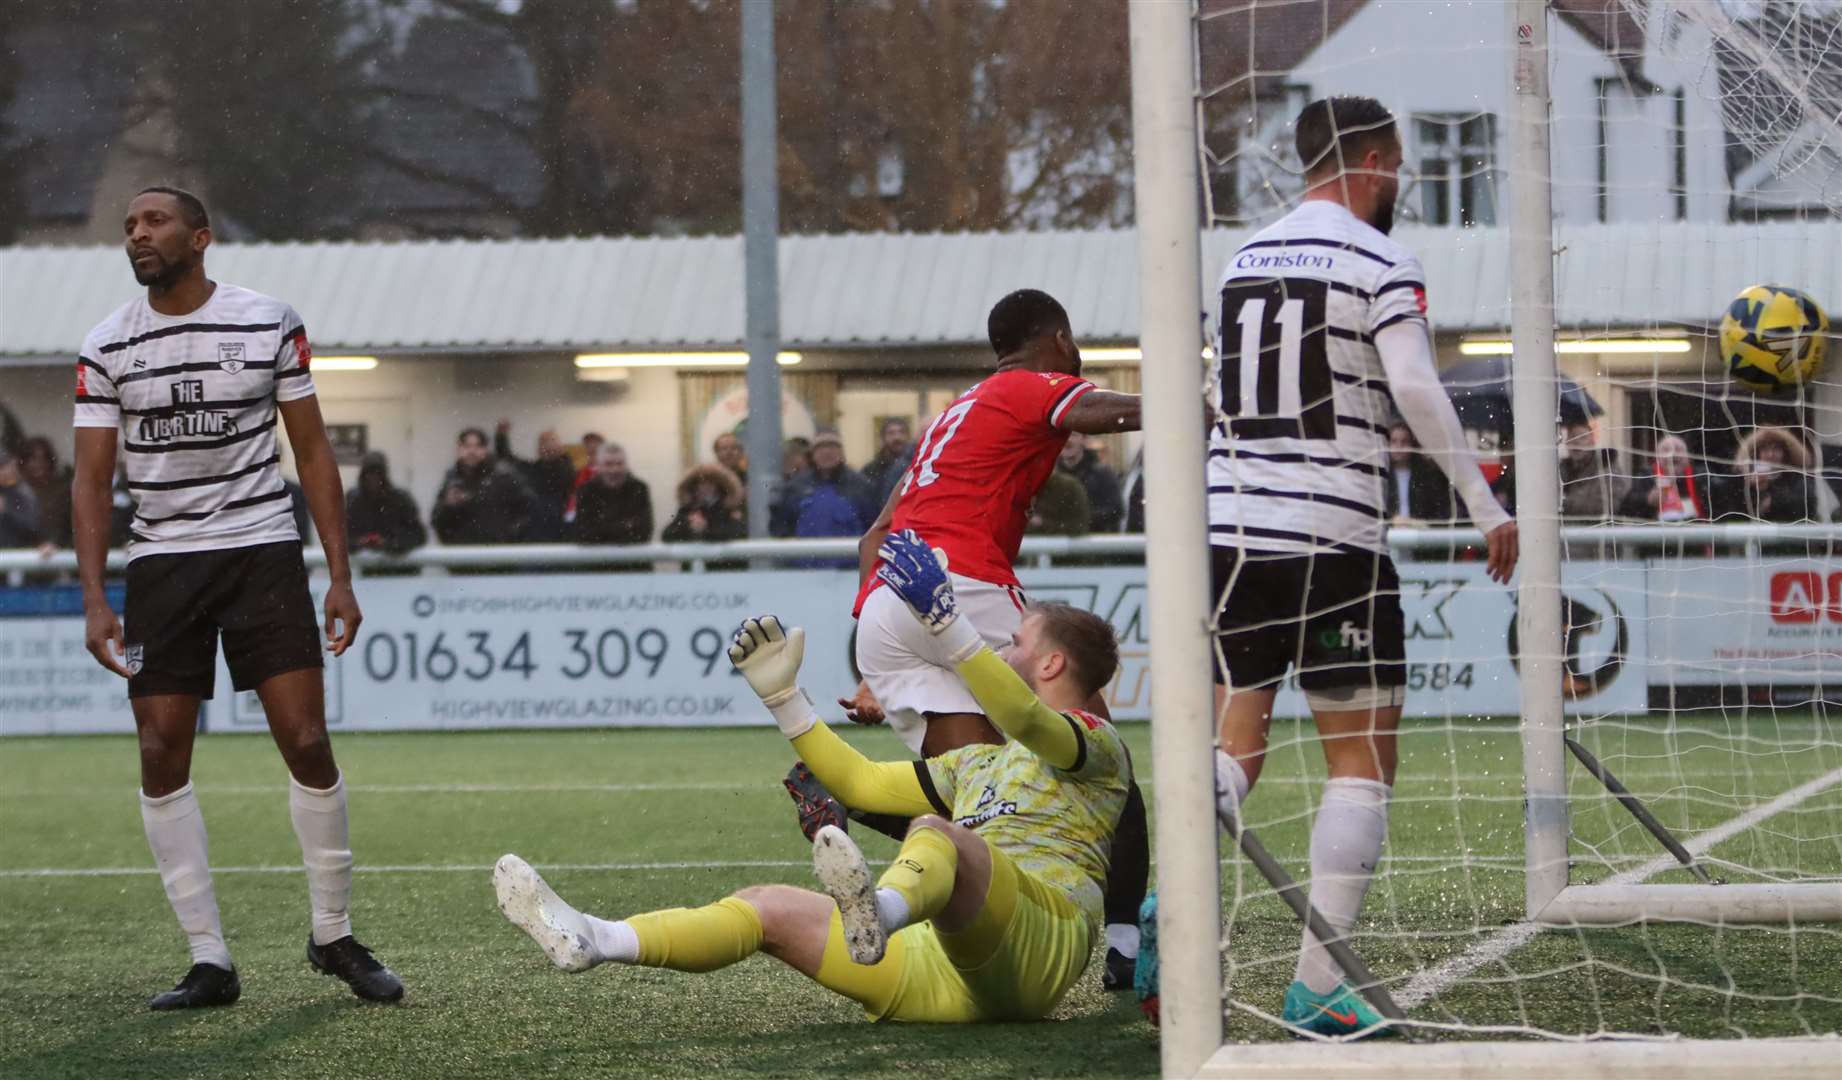 Chatham striker Rowan Liburd gets the match-winning goal in their 2-1 Isthmian Premier derby win over Margate on Saturday. Picture: Max English (@max_ePhotos)